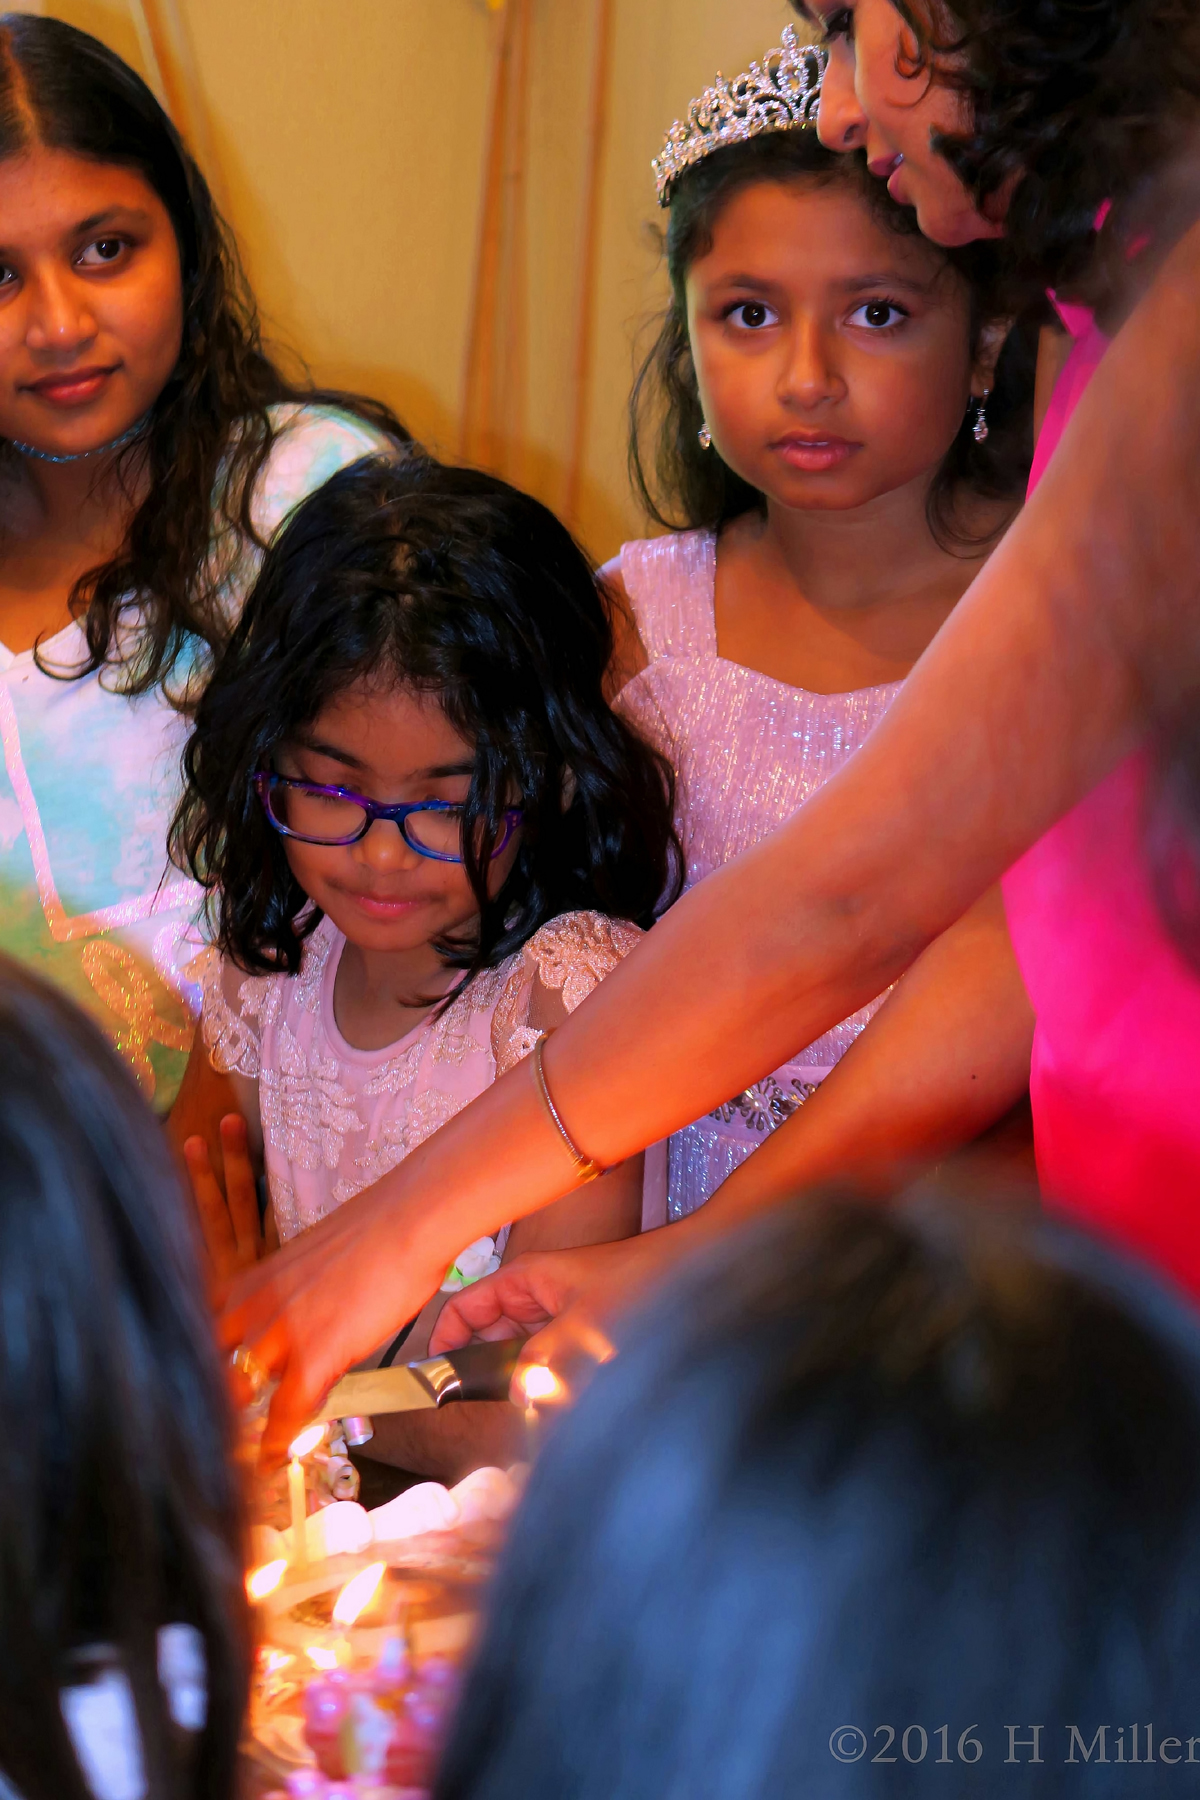 Lighting The Candles On The Spa Birthday Cake 